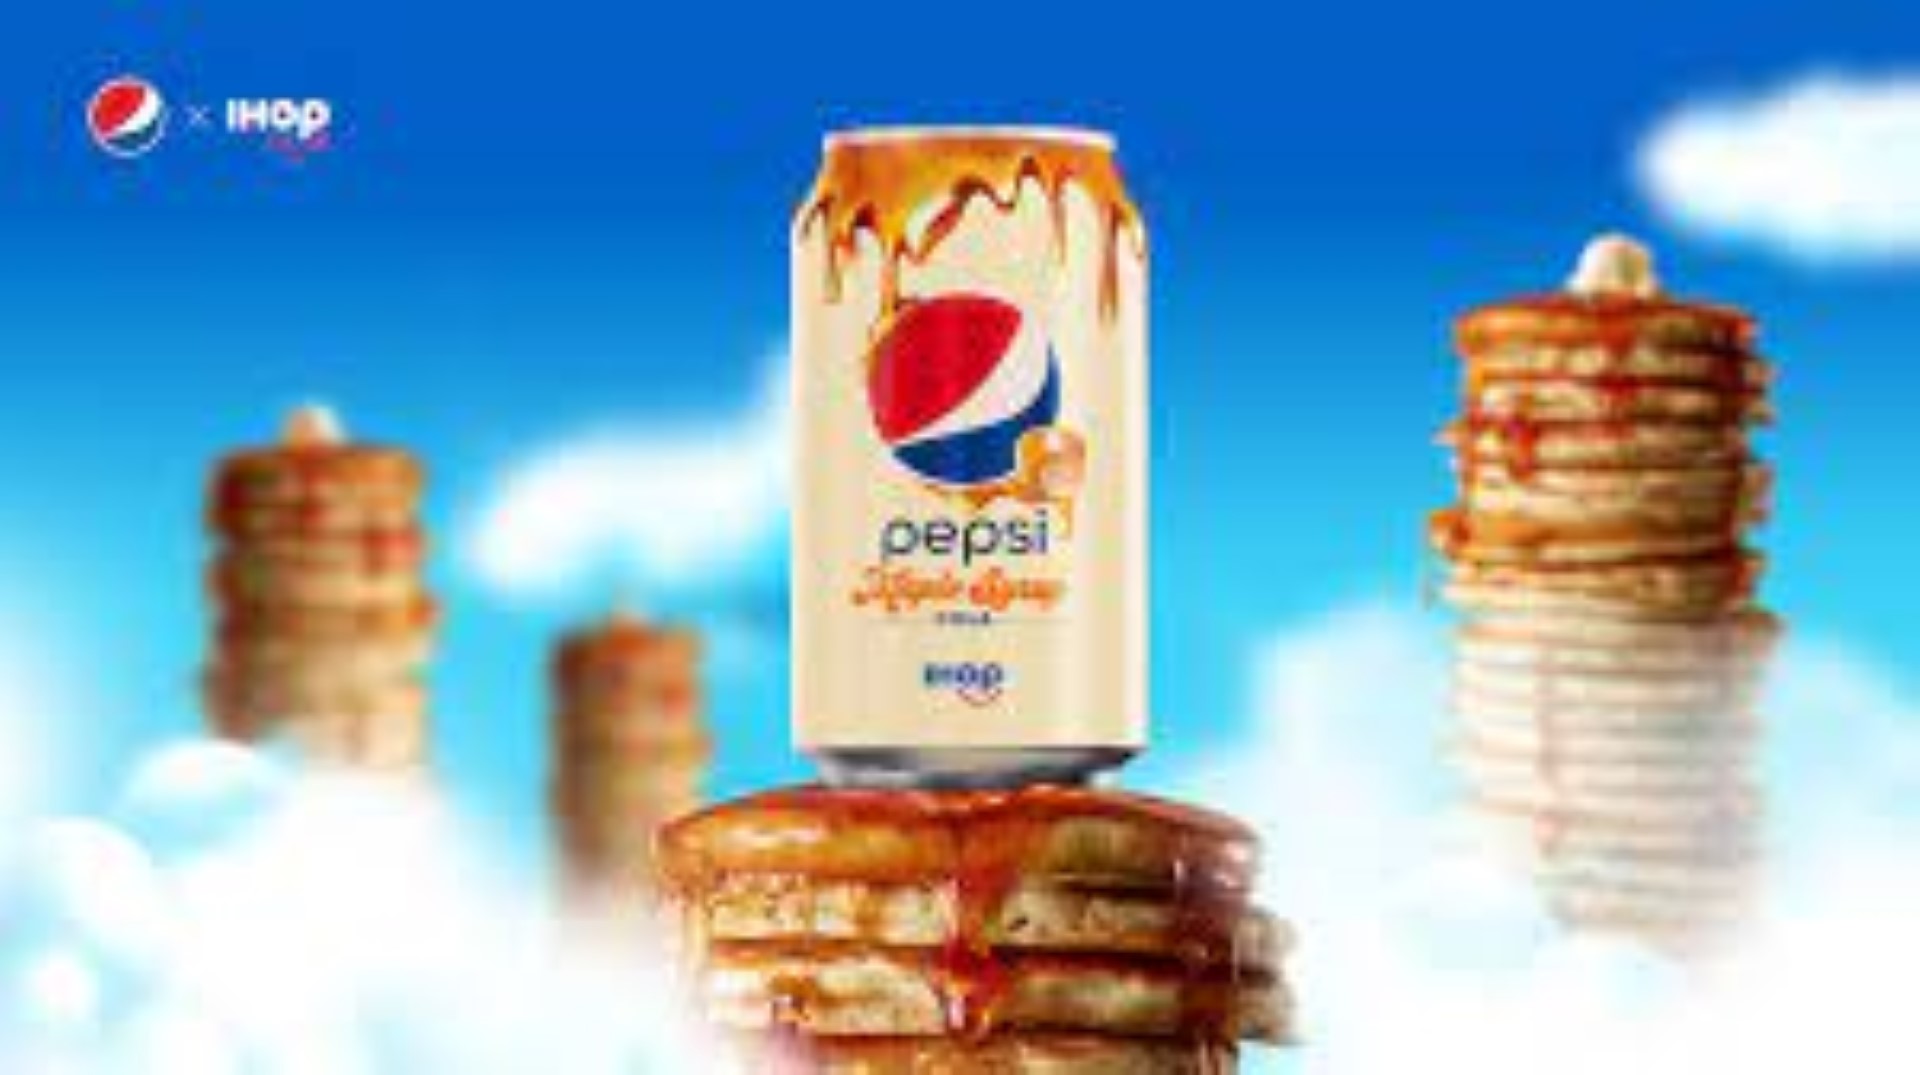 "IHOP® is introducing an array of exciting flavors and partnerships this spring, including the reintroduction of Pepsi® Maple Syrup Cola